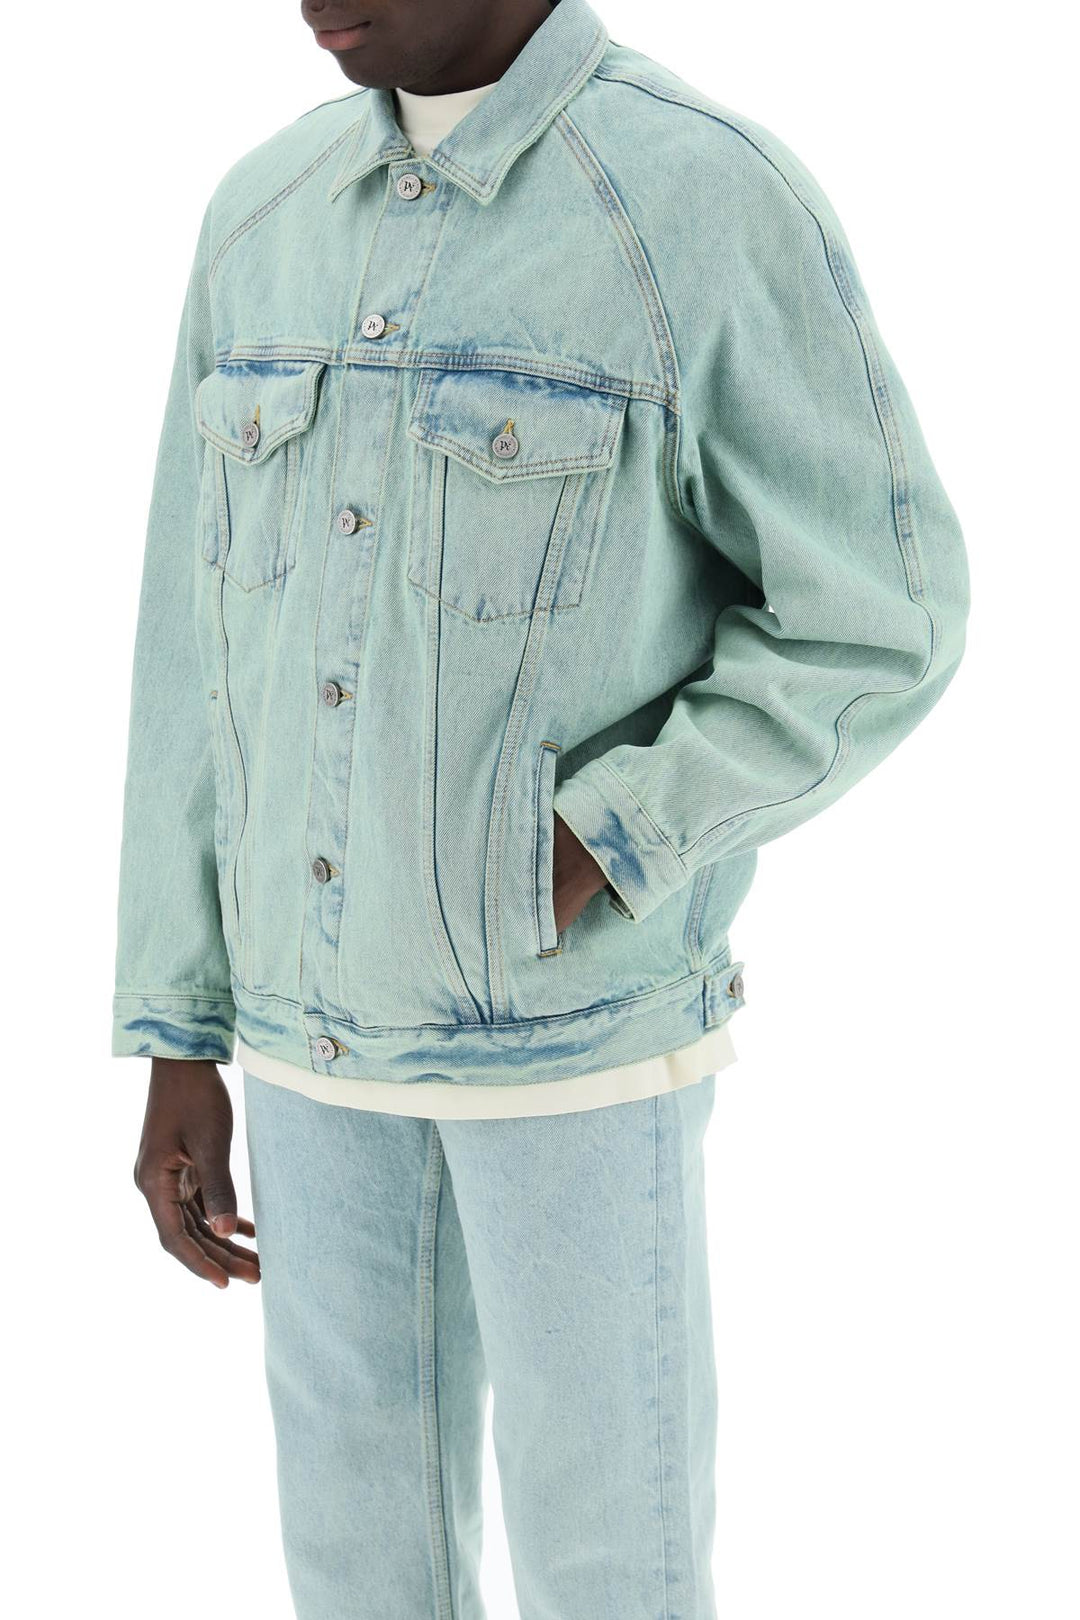 Palm Angels Replace With Double Quotedenim Overdye Jacket   Celeste